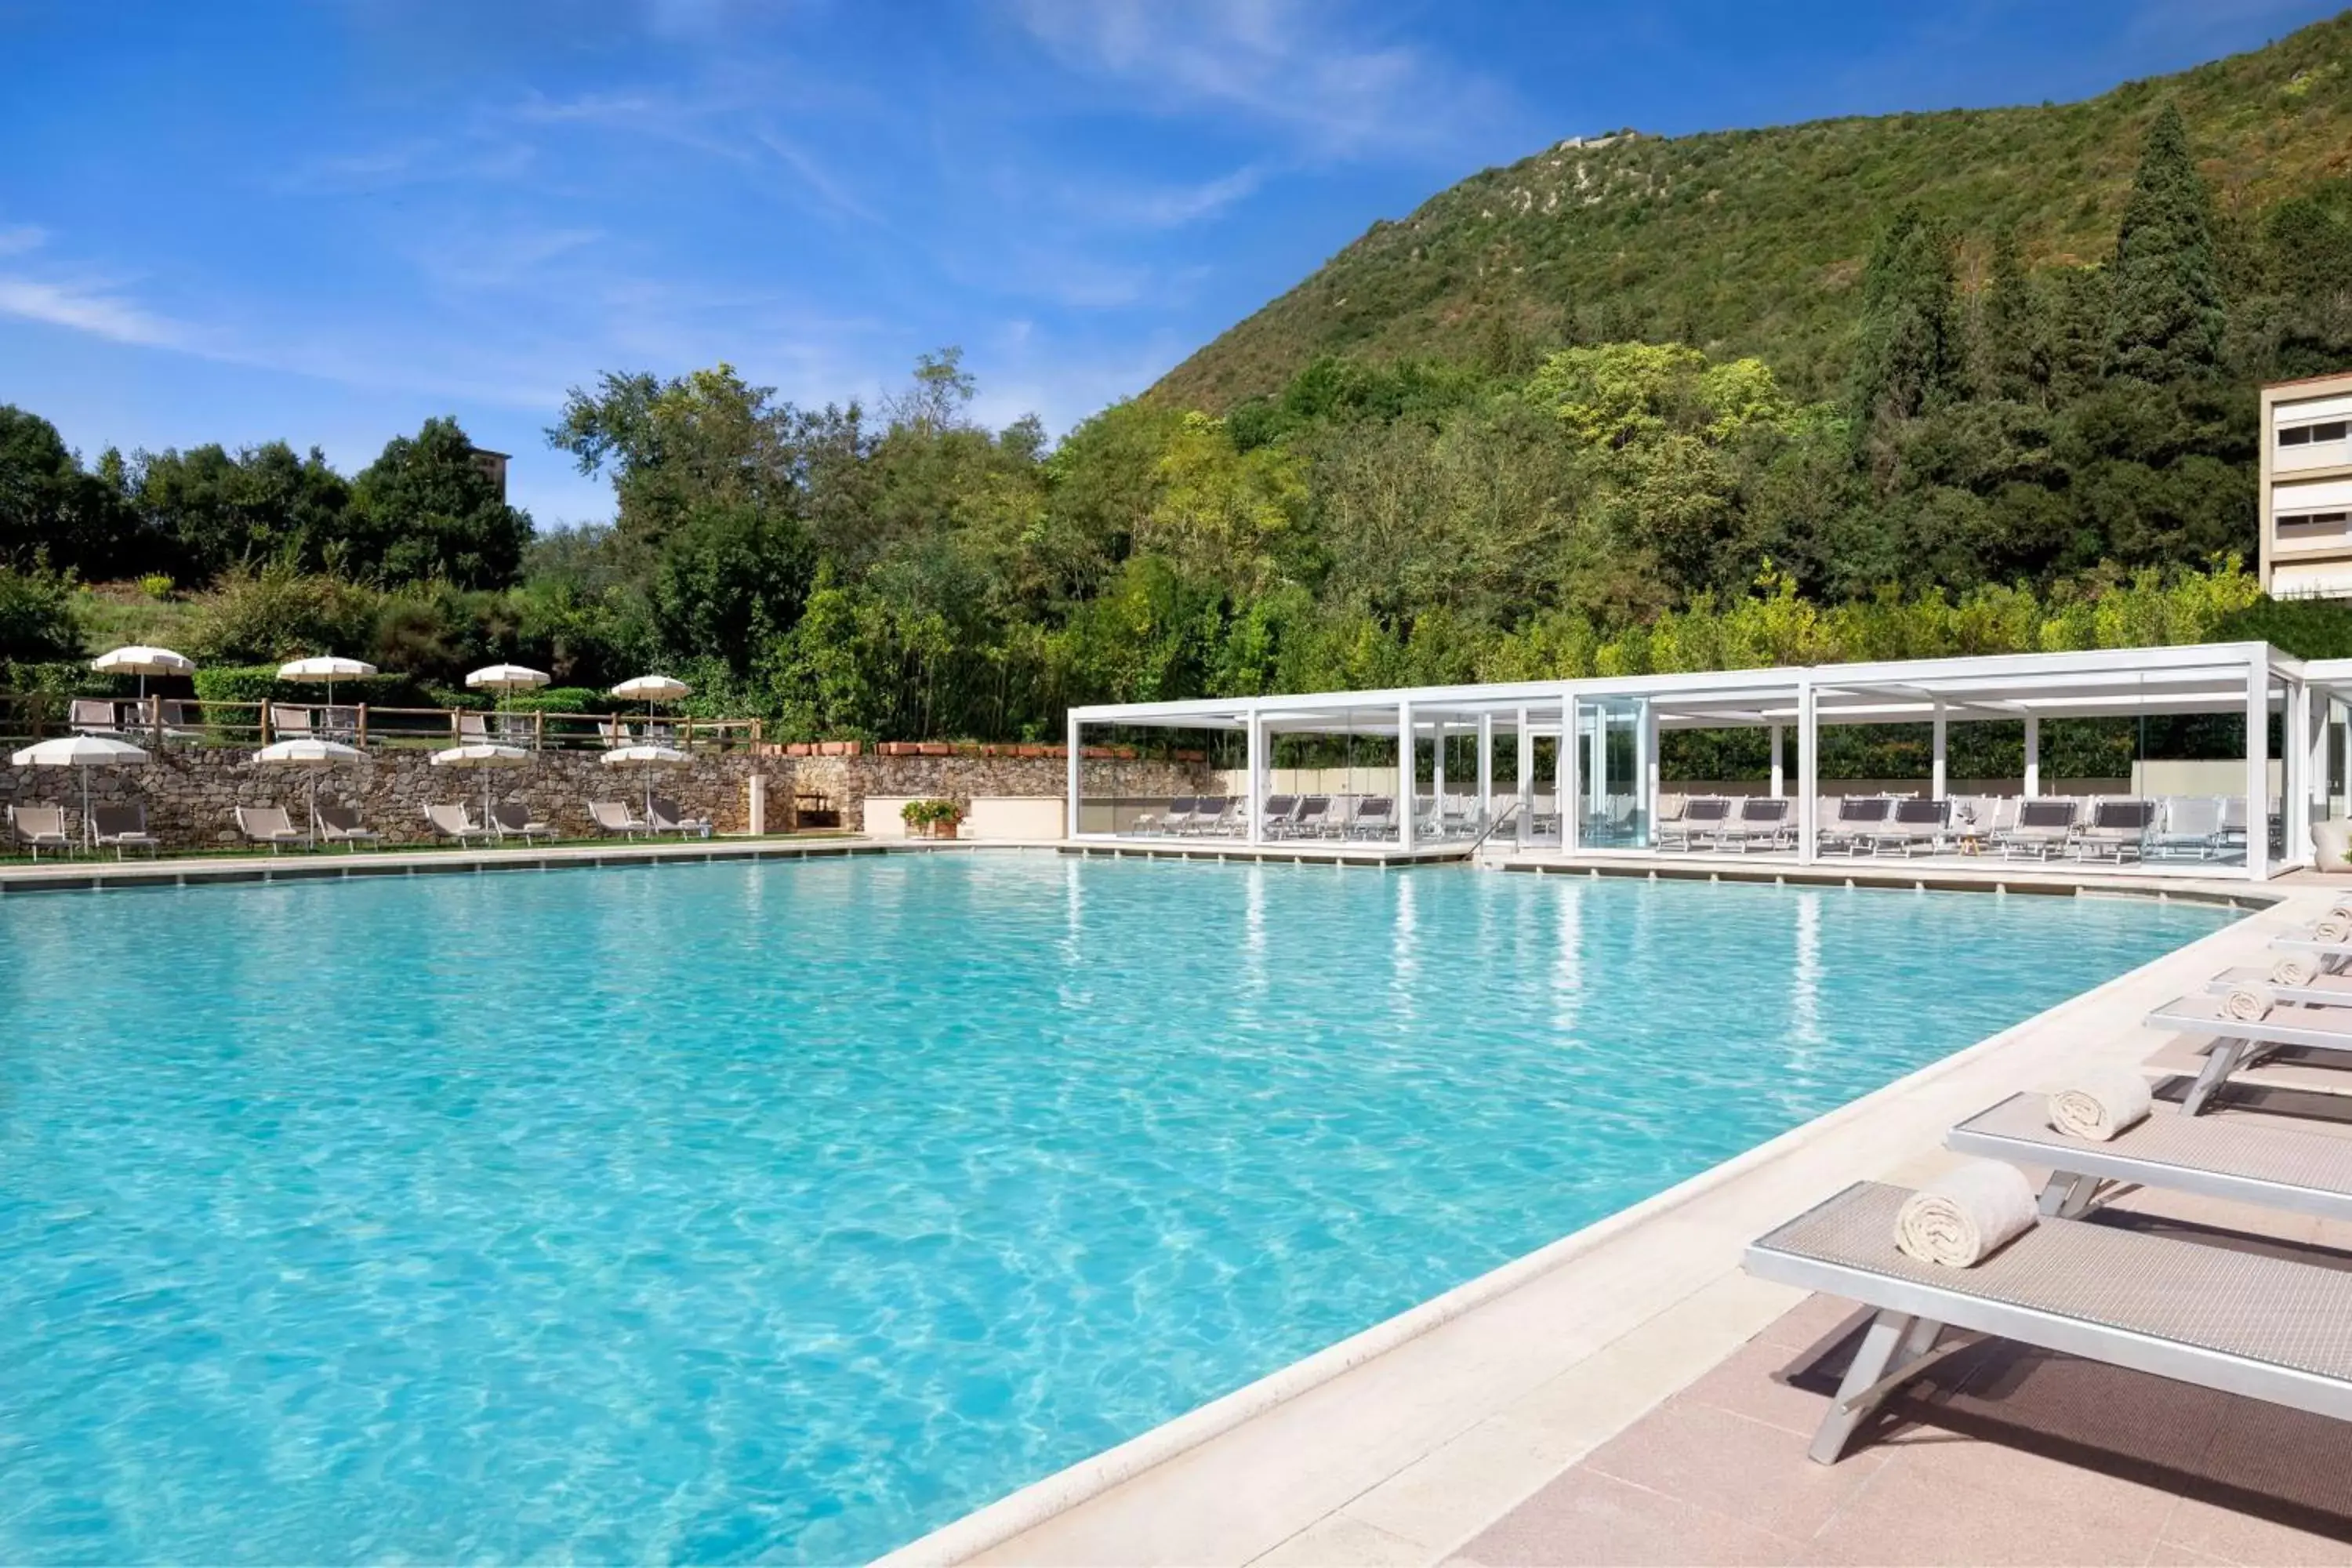 Swimming Pool in Grotta Giusti Thermal Spa Resort Tuscany, Autograph Collection